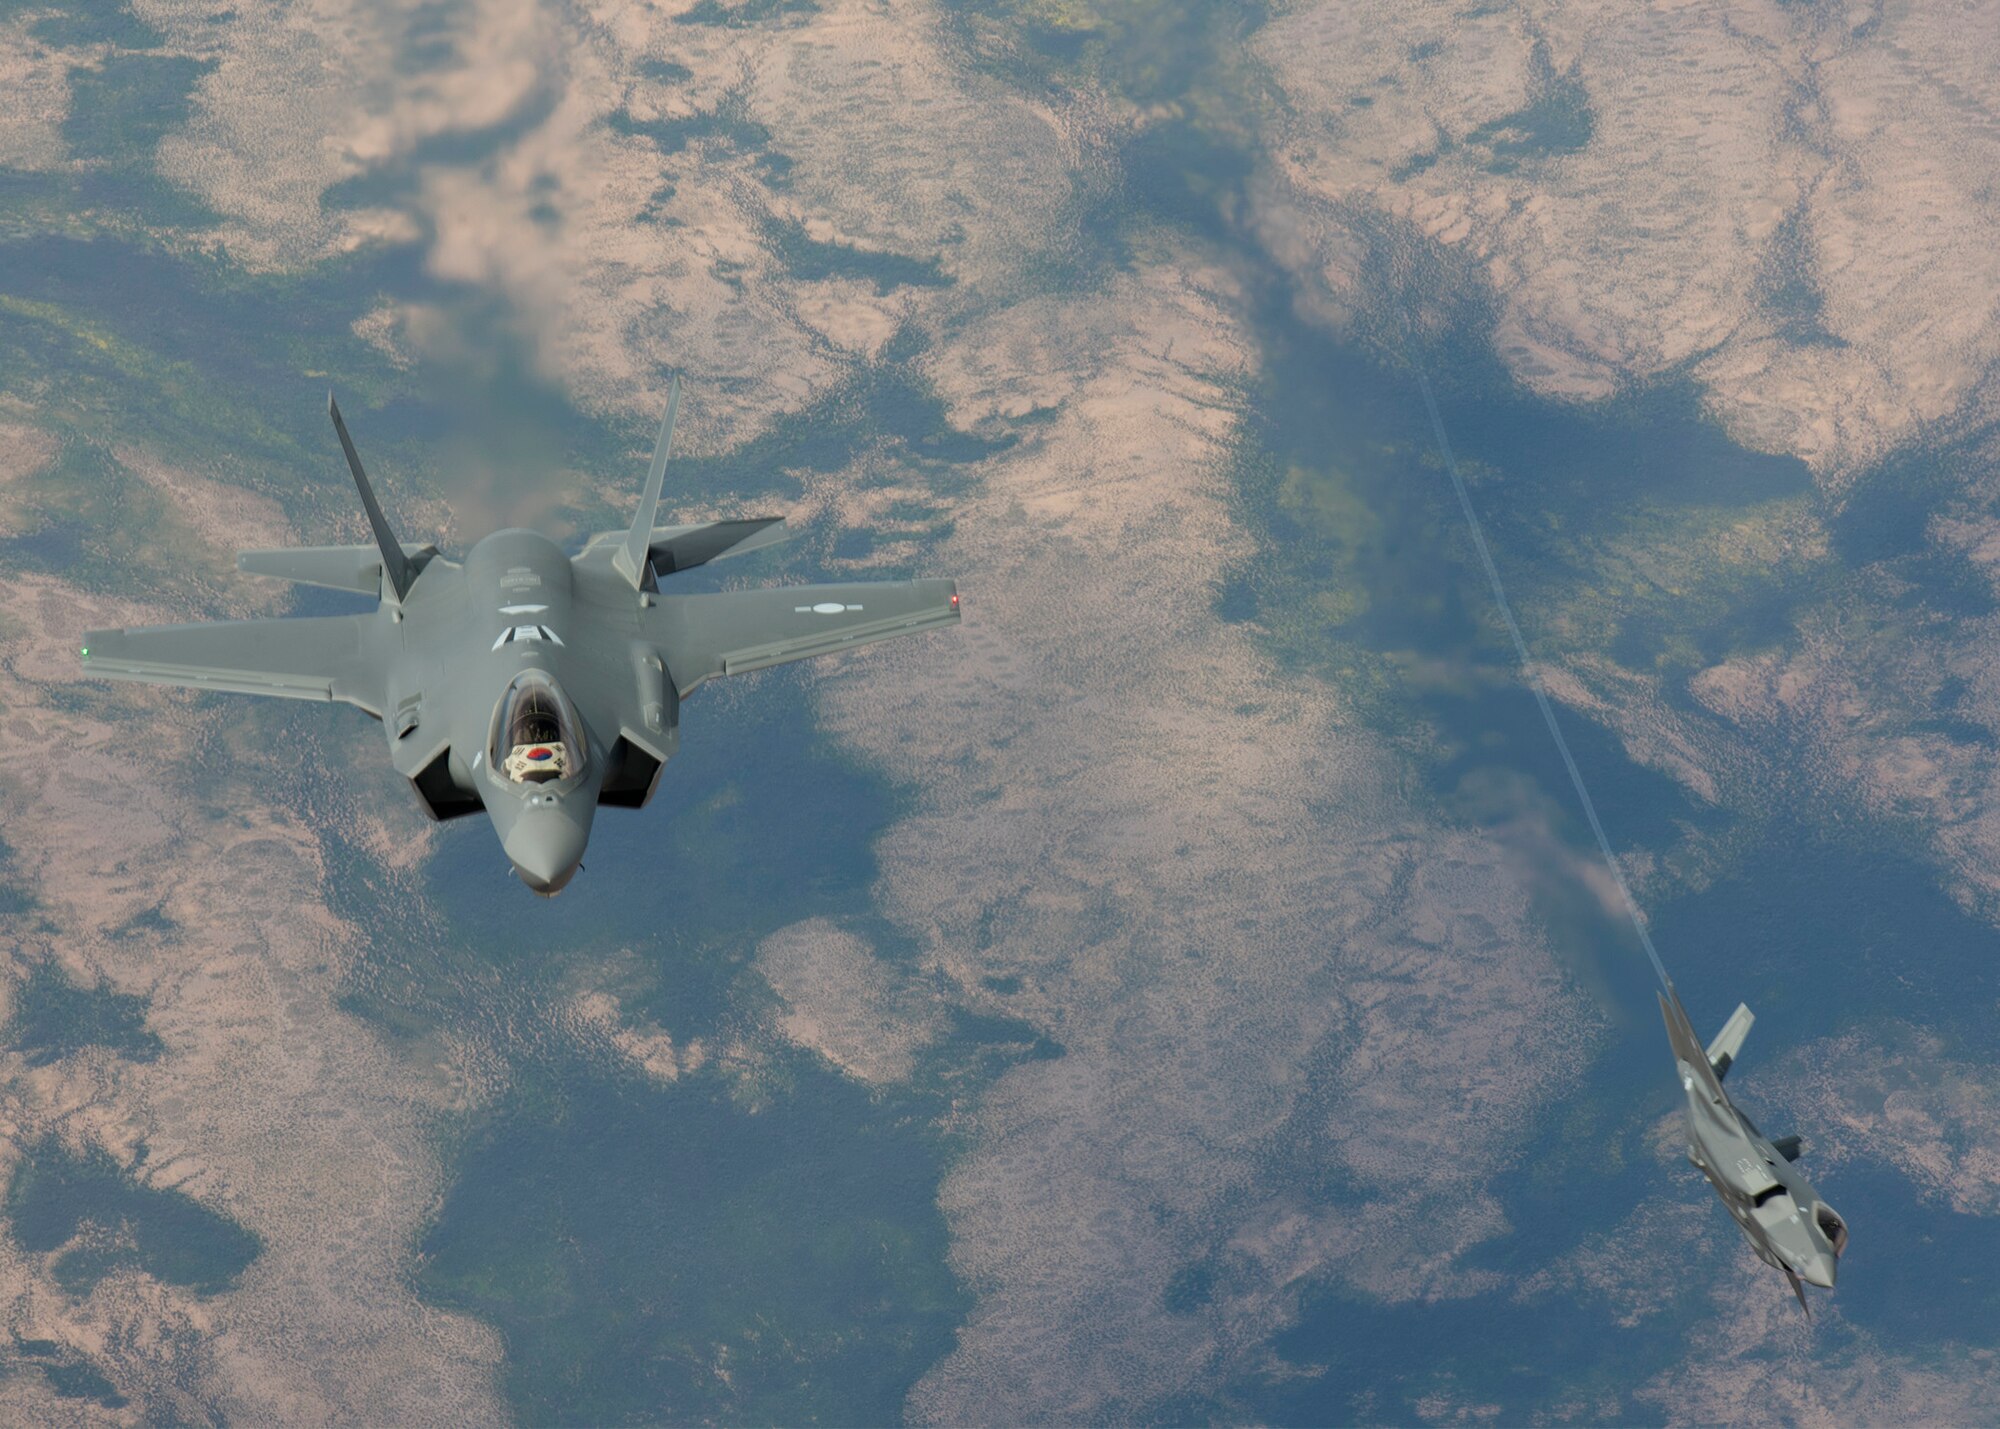 A Republic of Korea Air Force, F-35A Lightning II banks left during a refueling mission March 15, 2019, in Ariz. The aircraft’s electronic sensors contain the Electro-Optical Distributed Aperture System (DAS), a system that provides pilots with situational awareness in the area surrounding the aircraft for enhanced missile and aircraft warning, and day/night pilot vision. (U.S. Air Force photo by Airman 1st Class Leala Marquez)